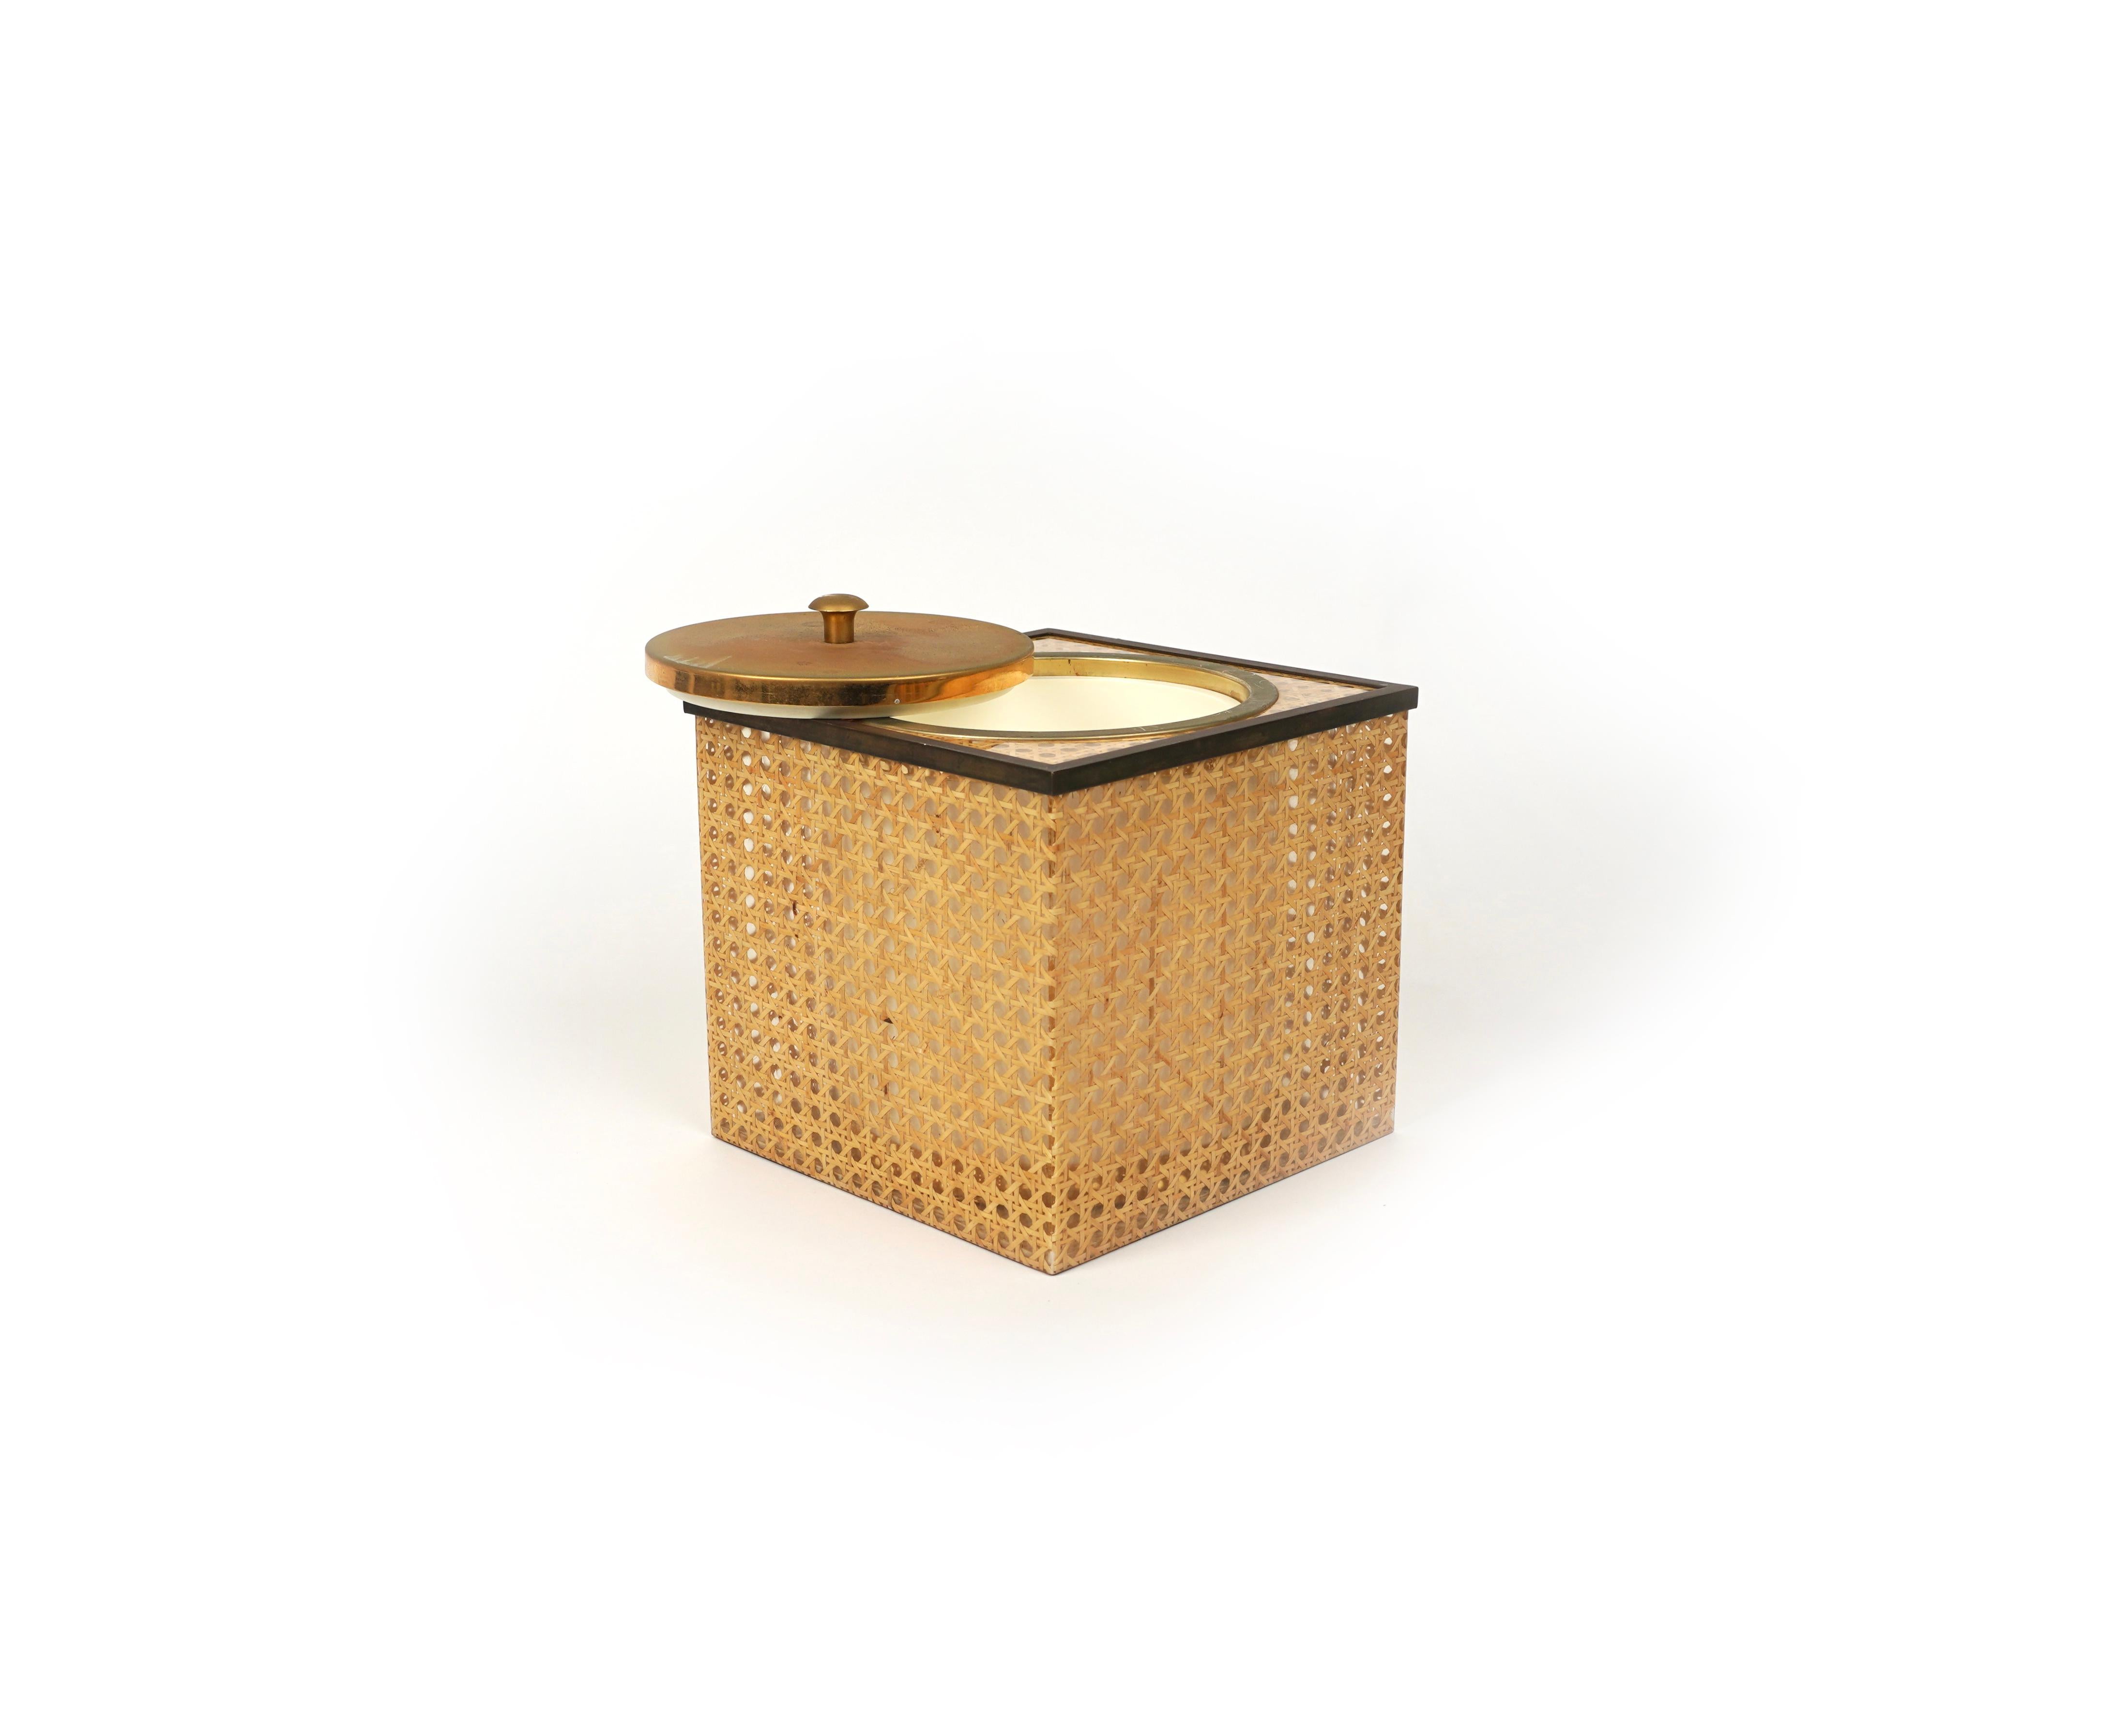 Metal Cube Ice Bucket in Lucite, Rattan and Brass Christian Dior Style, Italy, 1970s For Sale